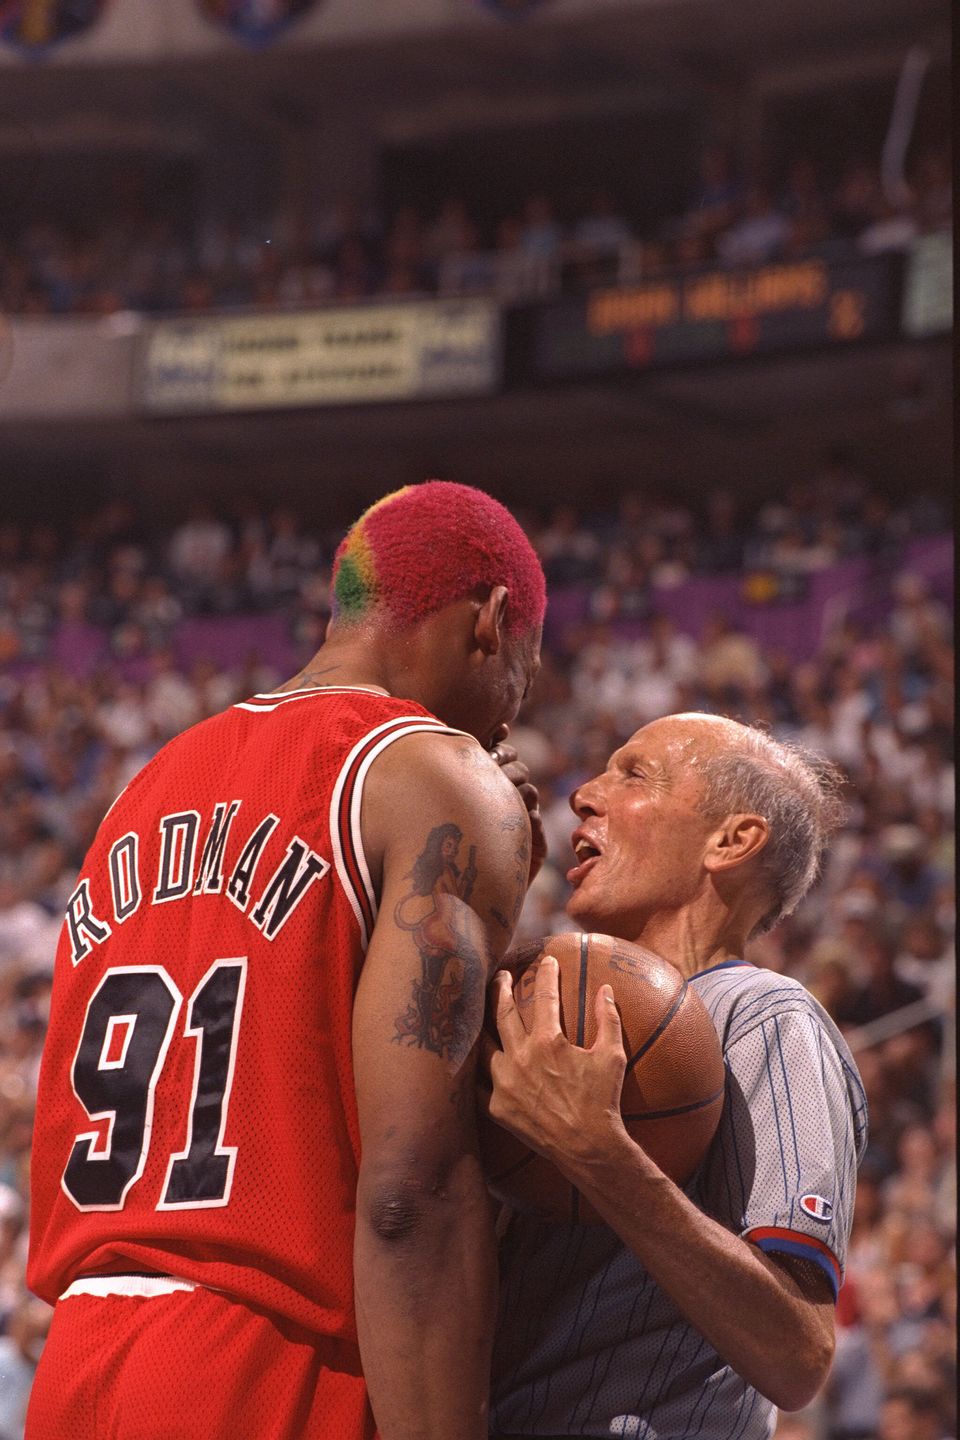 28 Photos Of Dennis Rodman's Iconic, Ridiculously Colorful Hair